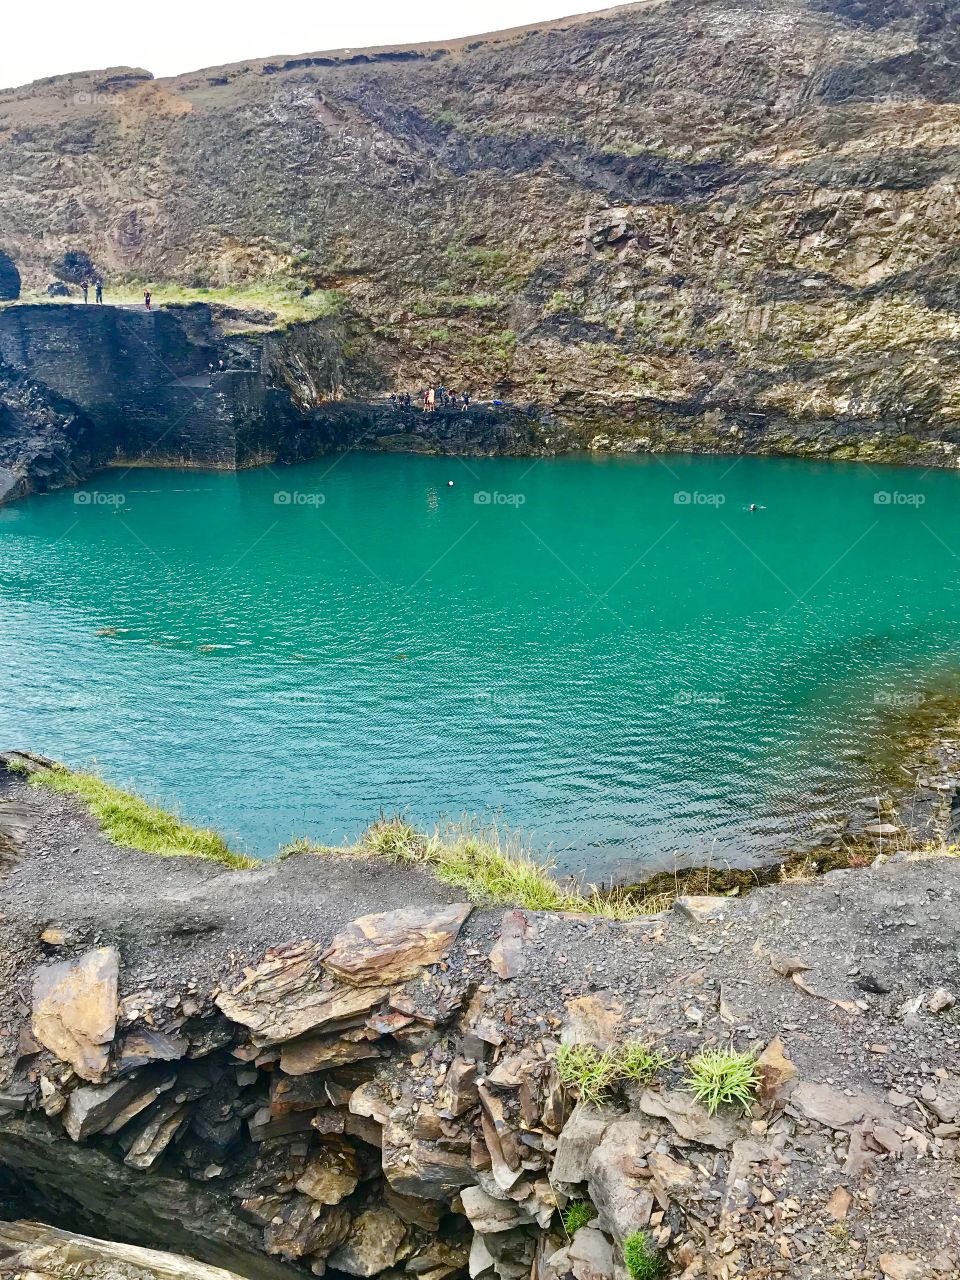 Blue Lagoon Wales Pembrokeshire travel nature quarry water beautiful scenery with landscape 